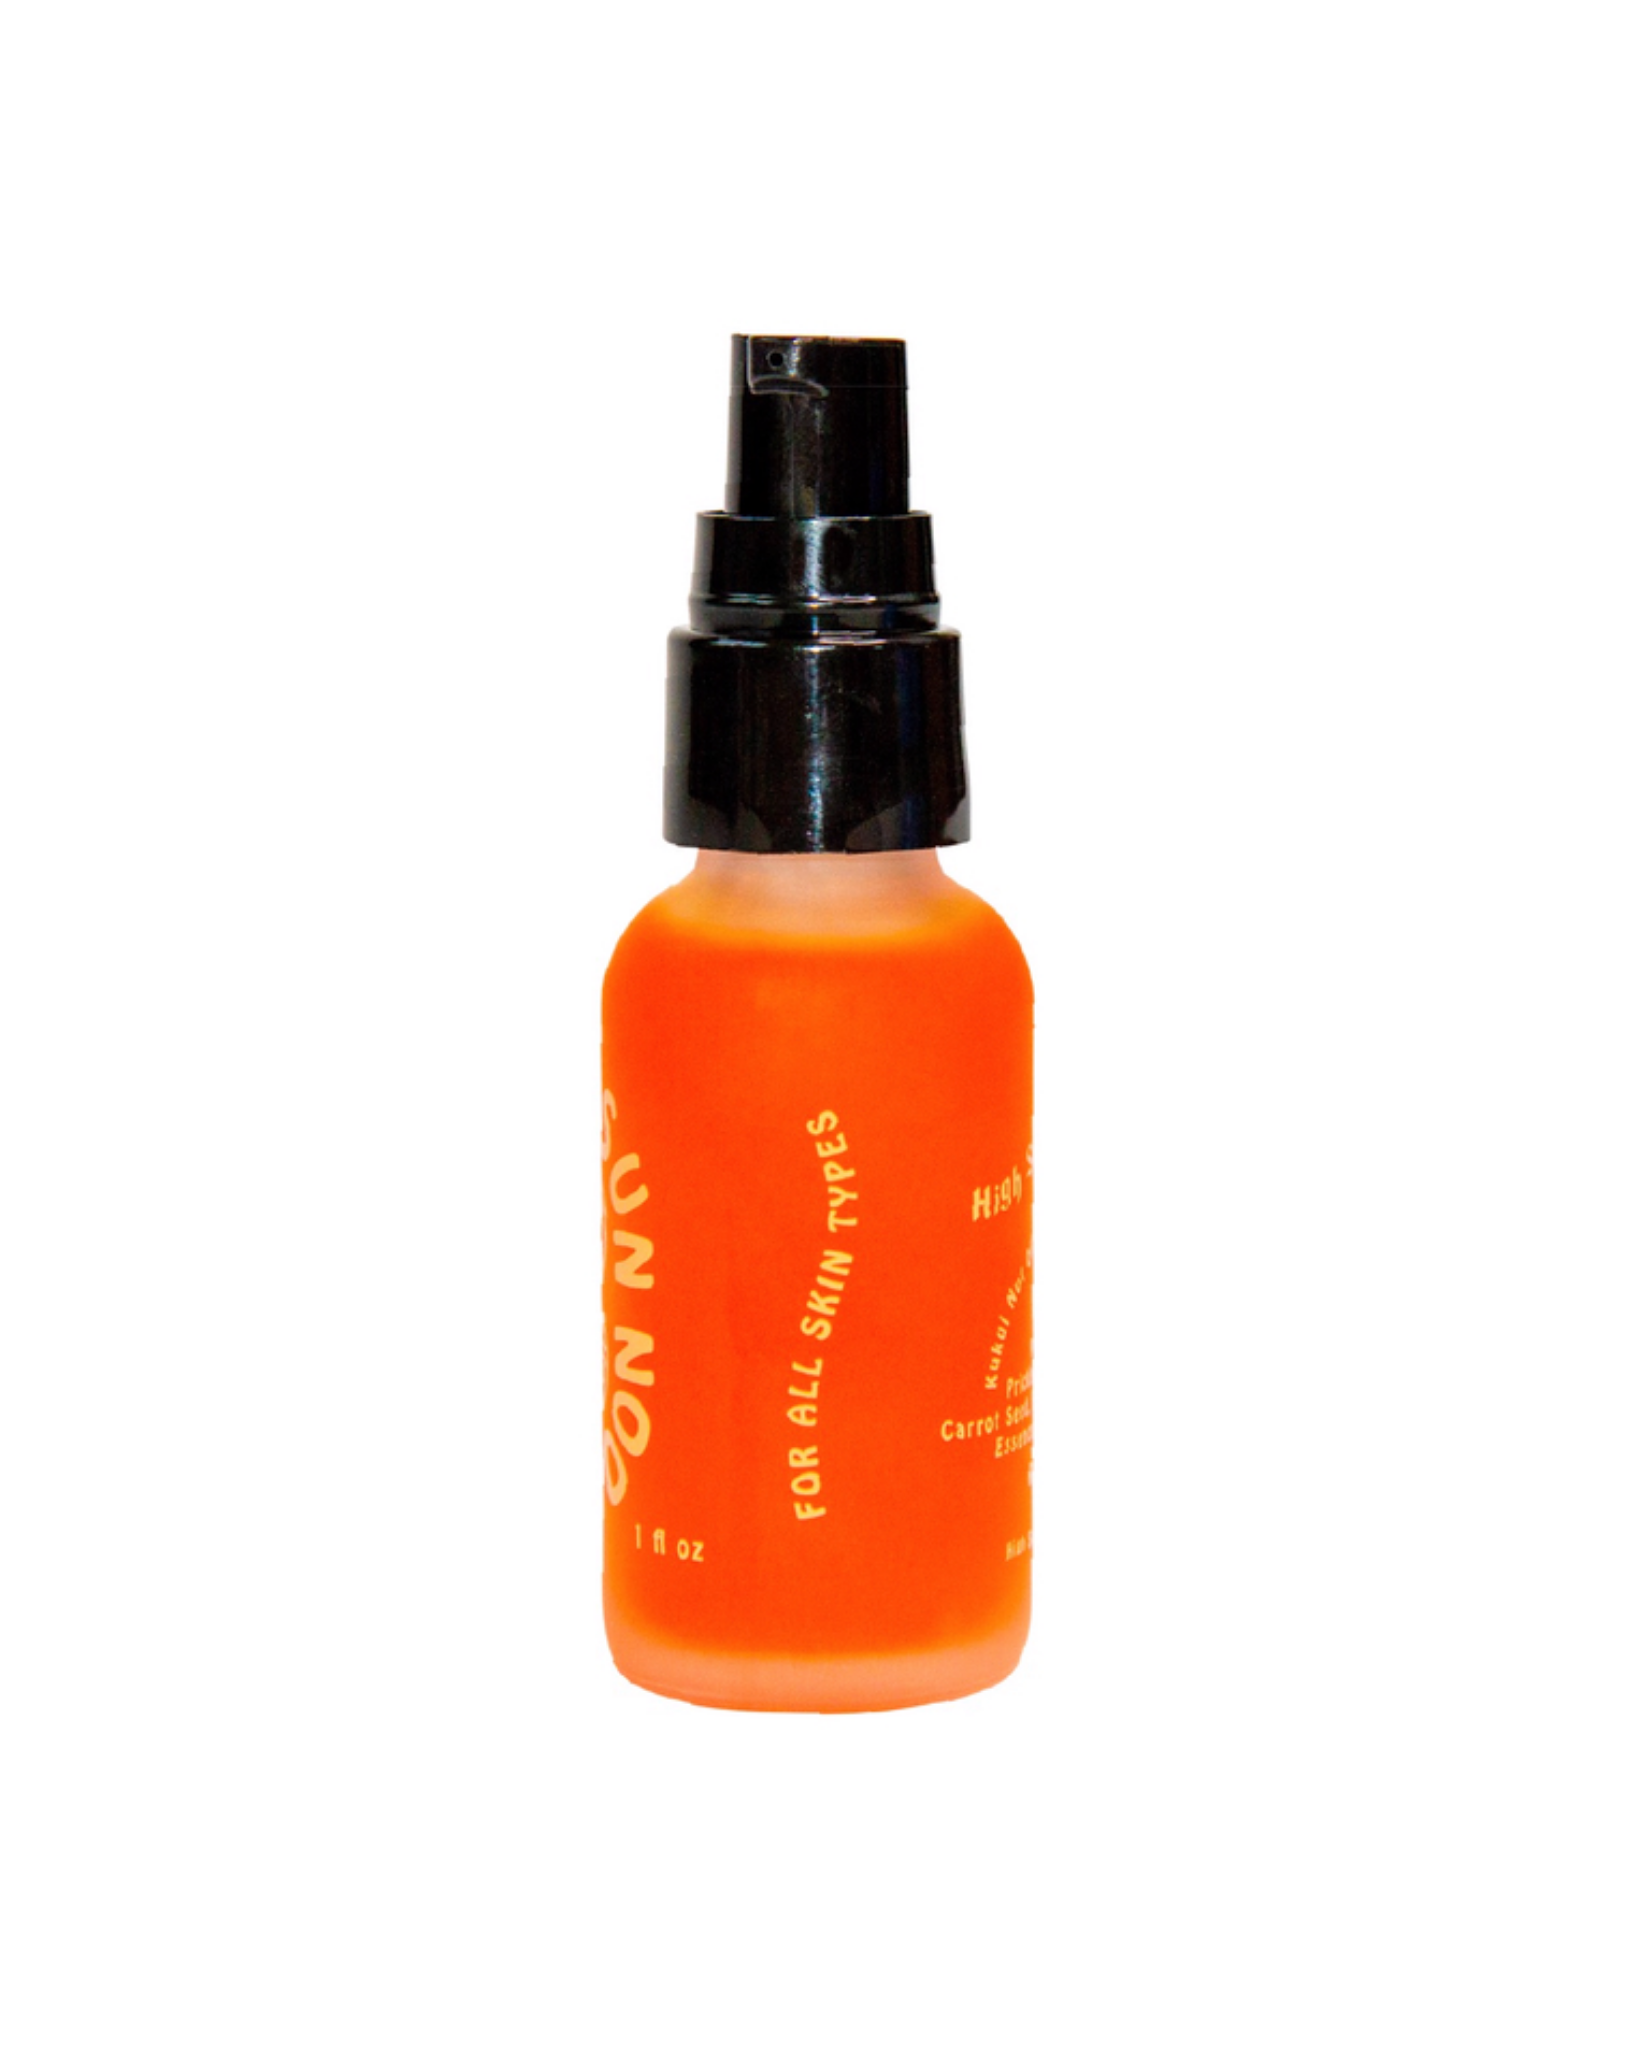 High sun low moon face oil available at Ease Toronto